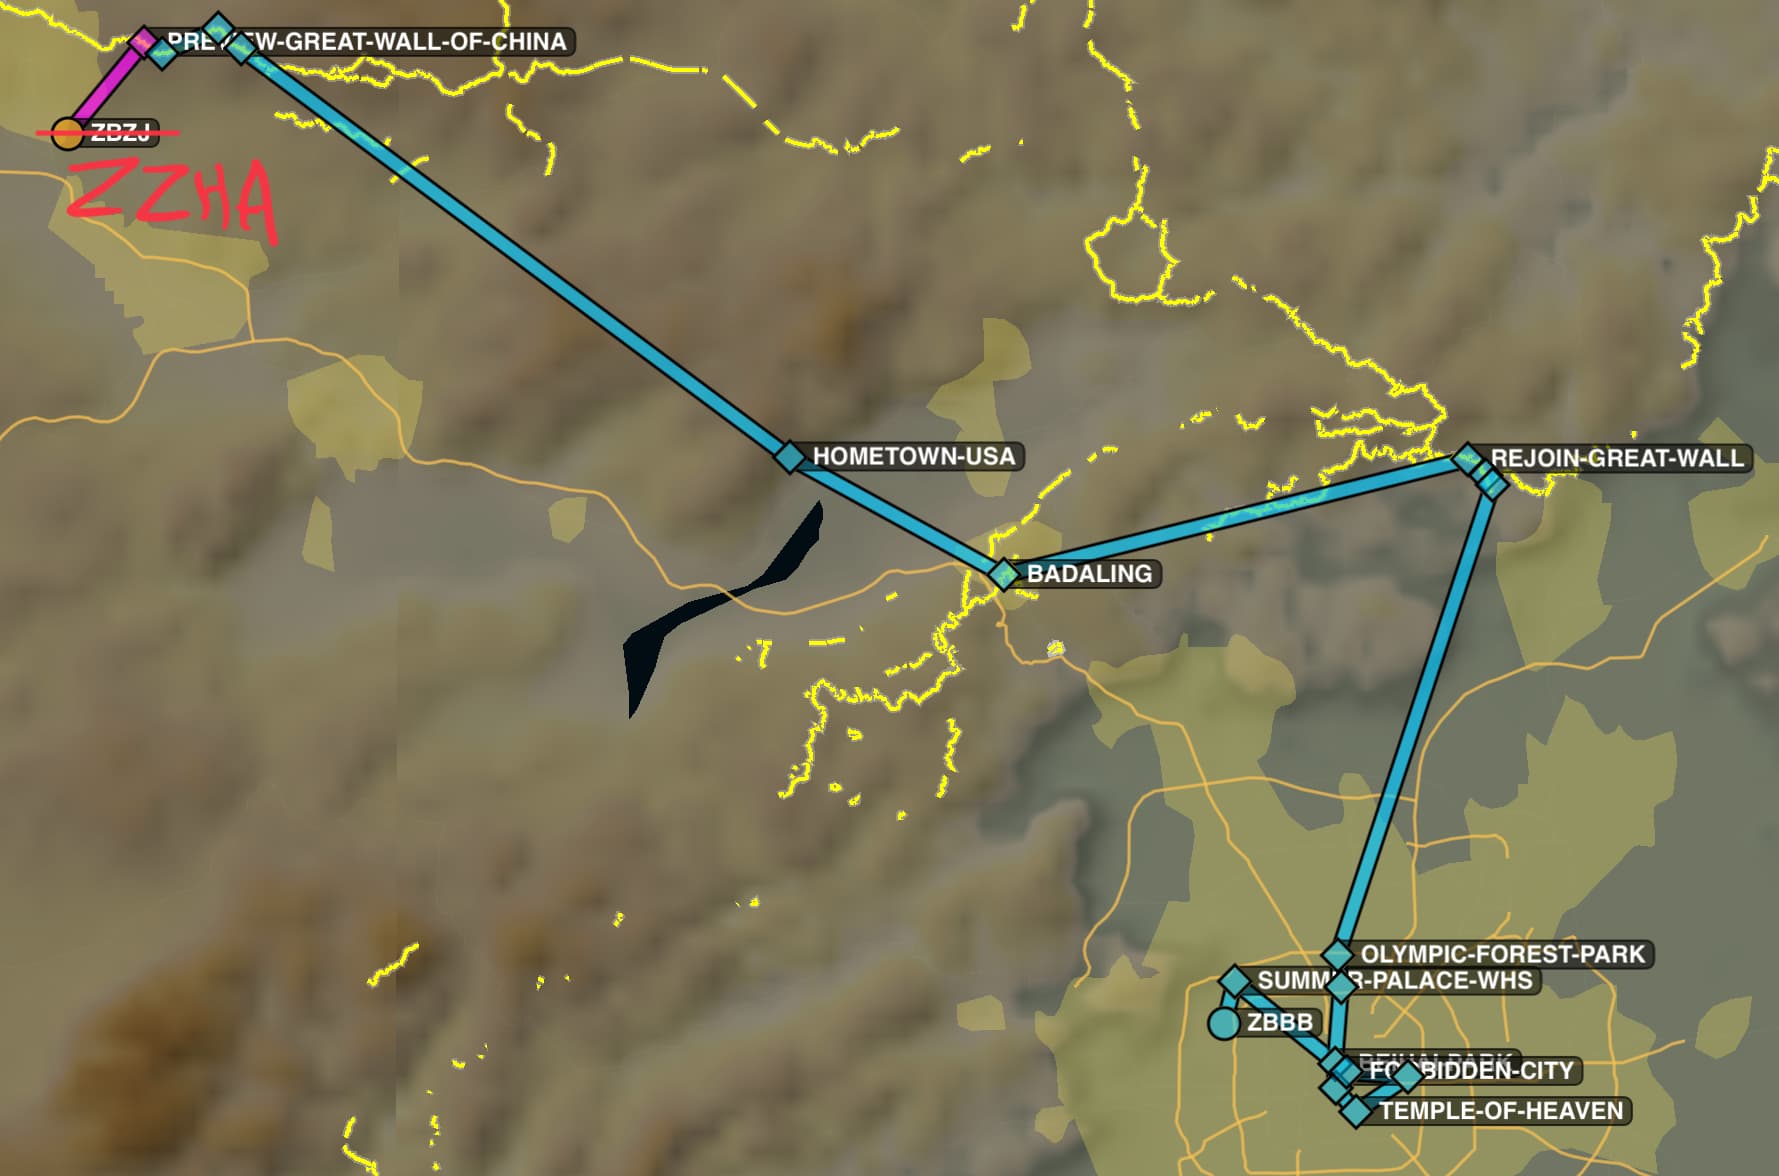 Microsoft Flight Simulator lets you fly through China, where the